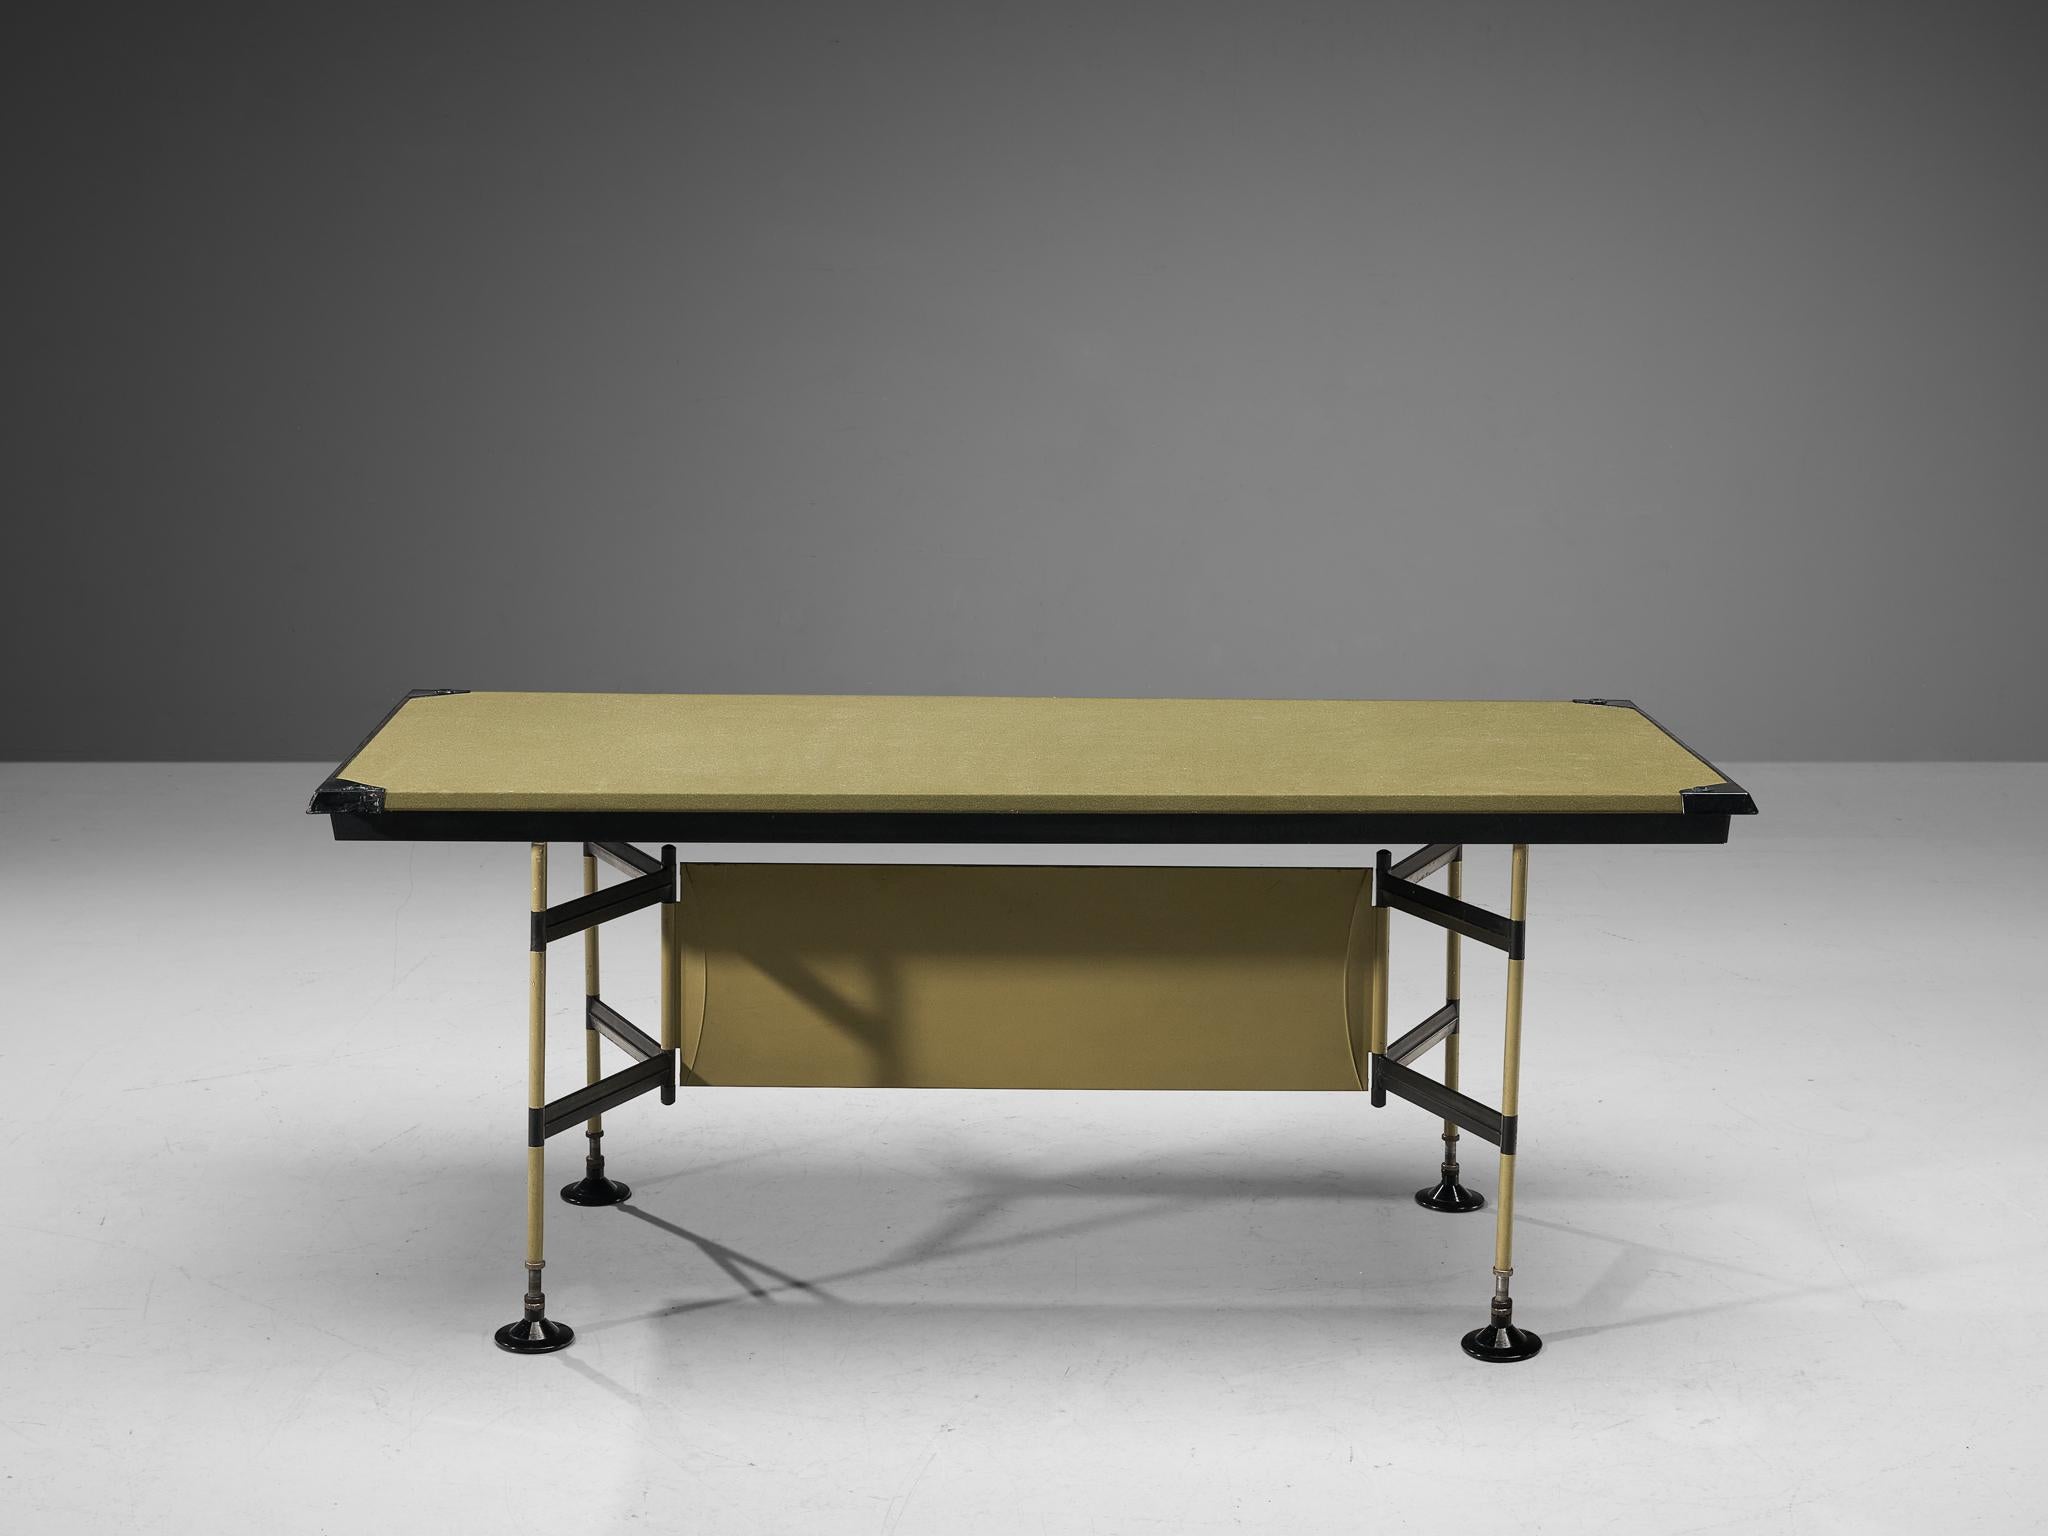 Studio BBPR for Olivetti, 'Spazio' table, steel, felt, vinyl, plastic, Italy, design 1959/60, production 1960s 

In 1954, Olivetti, the Italian office equipment manufacturer, hired BBPR to design their New York showroom on Fifth Avenue and to create